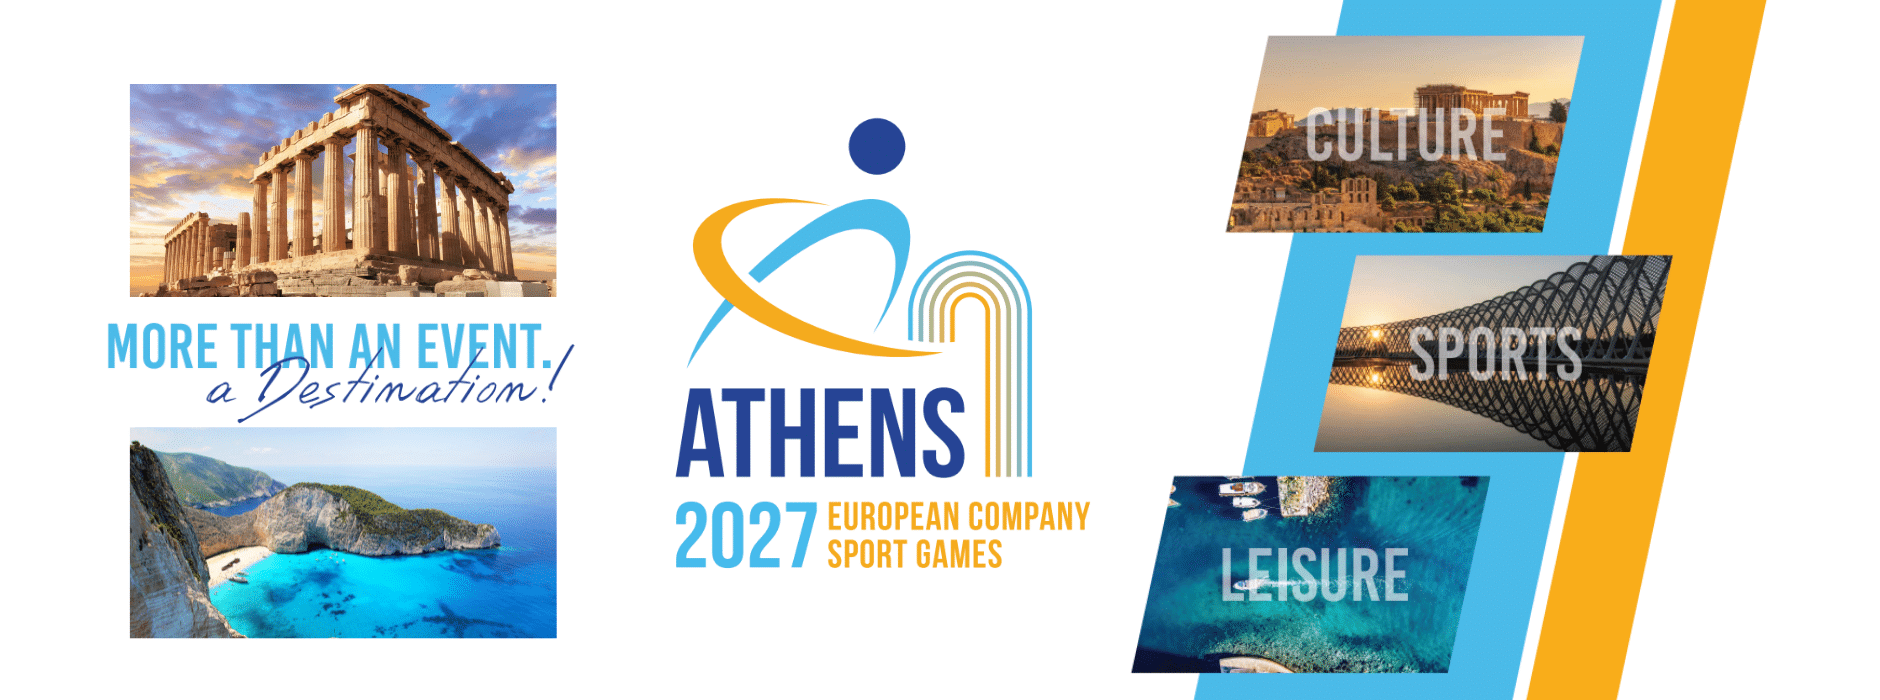 european-company-sport-games-2027-in-athens!